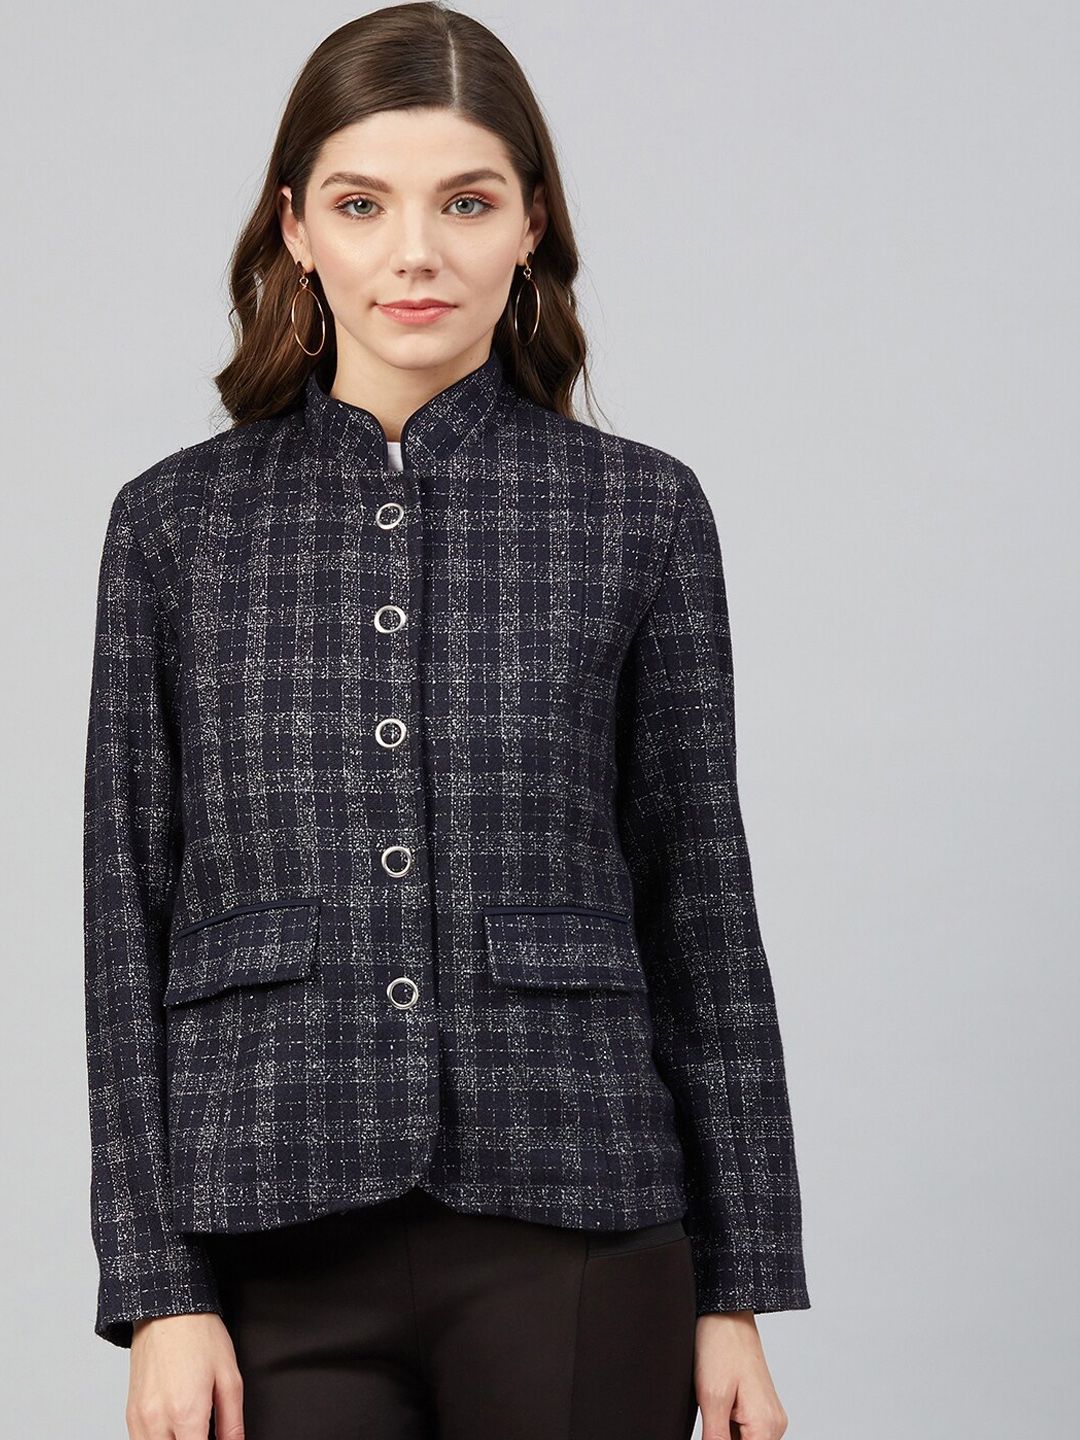 Carlton London Women Navy Blue Checked Tailored Jacket Price in India